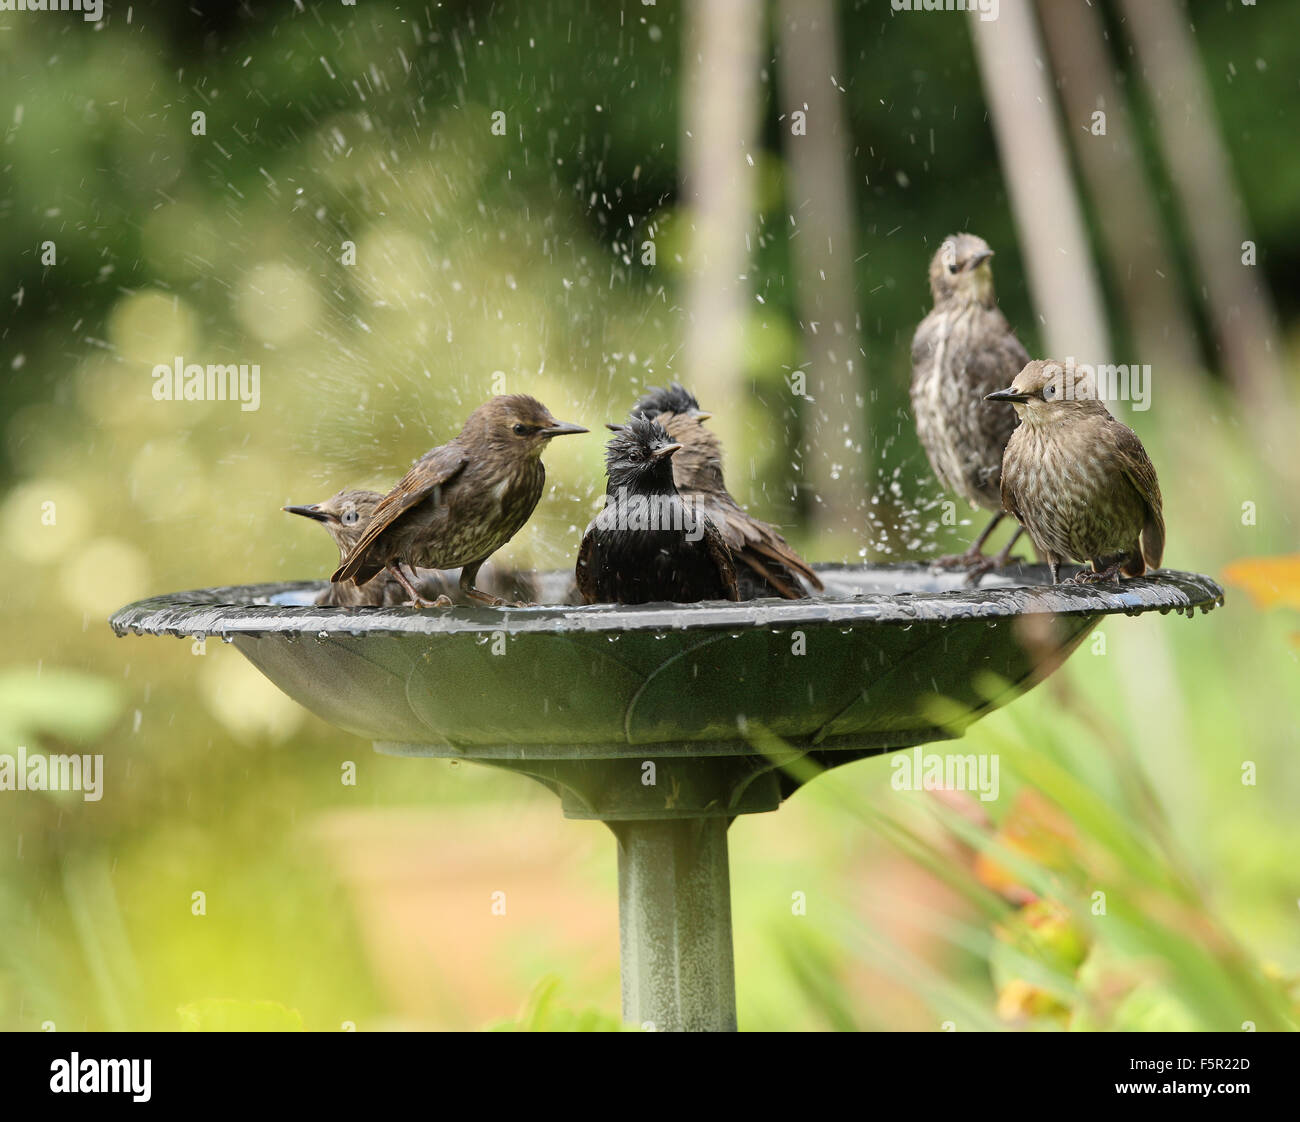 A family of Starlings enjoying a water bath Stock Photo